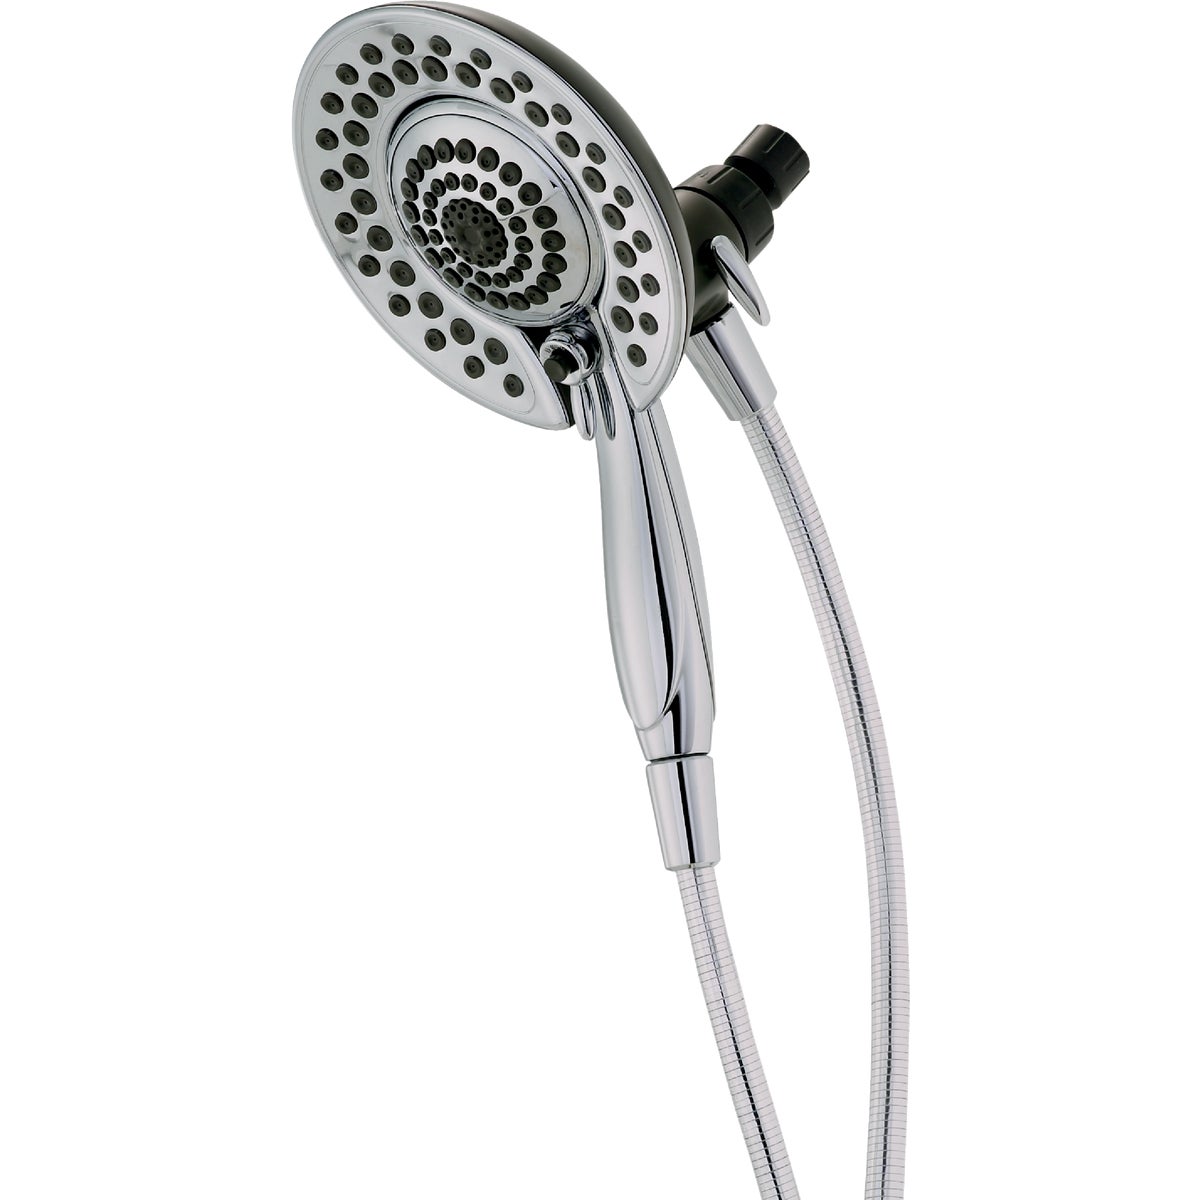 Delta In2ition 5-Spray 1.8 GPM Combo Handheld Shower & Showerhead, Chrome